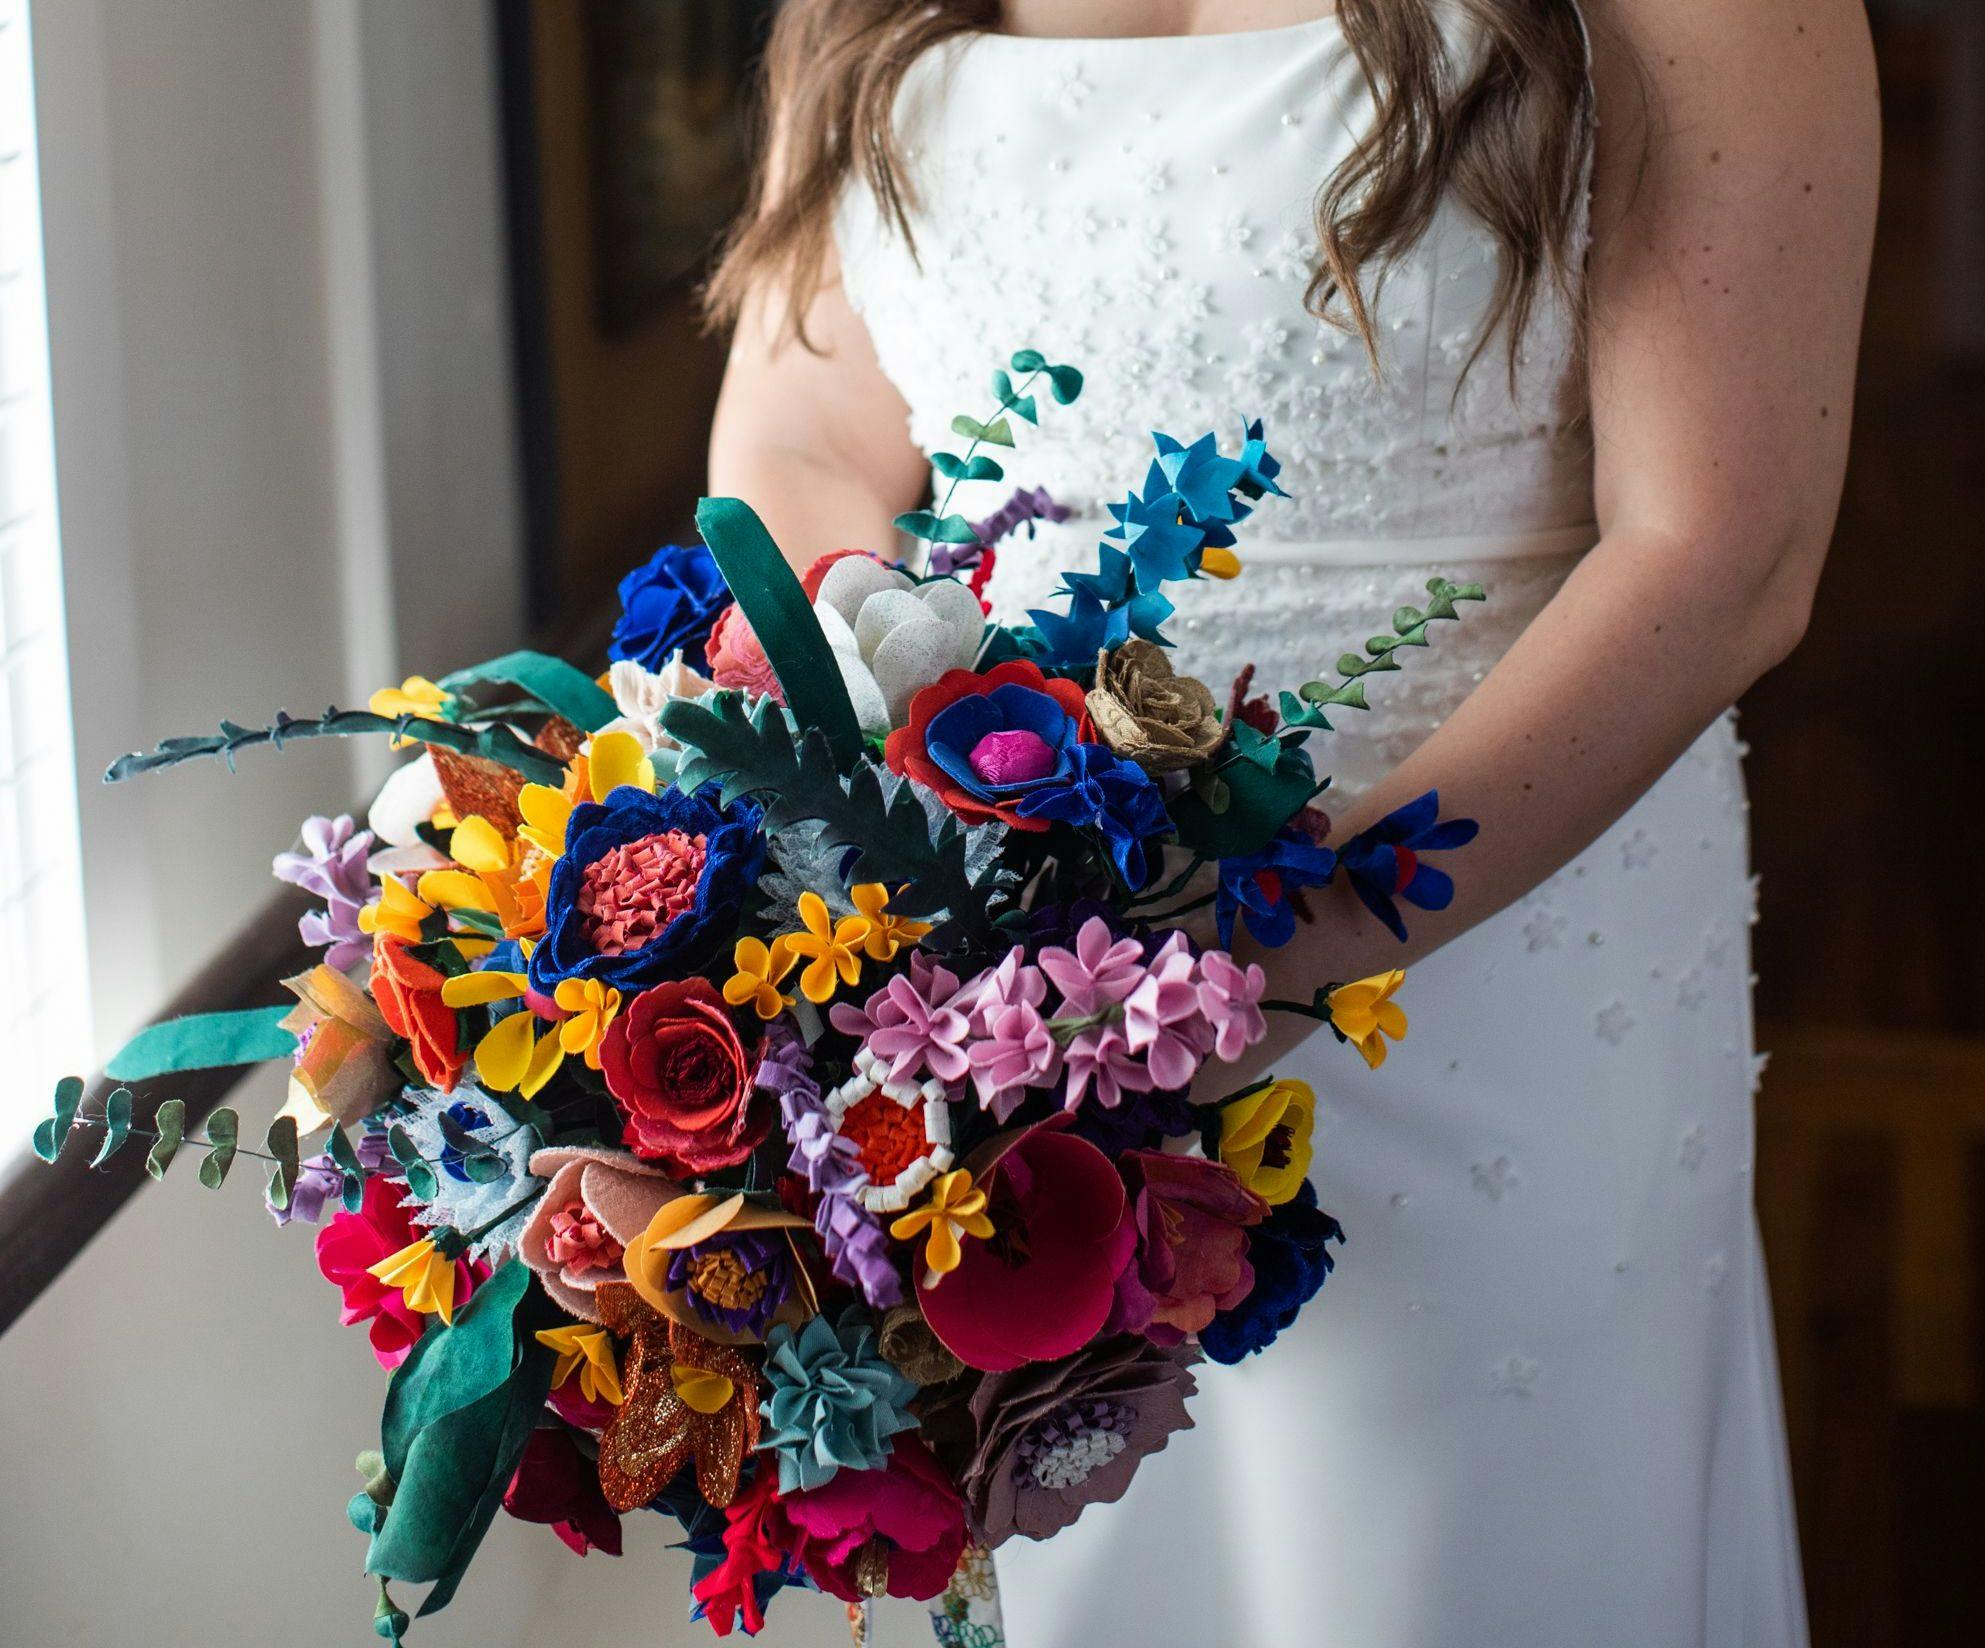 A bride with long brown hair looks down lovingly at her bouquet, which is large and made of fabric flowers in a variety of shapes and colors.